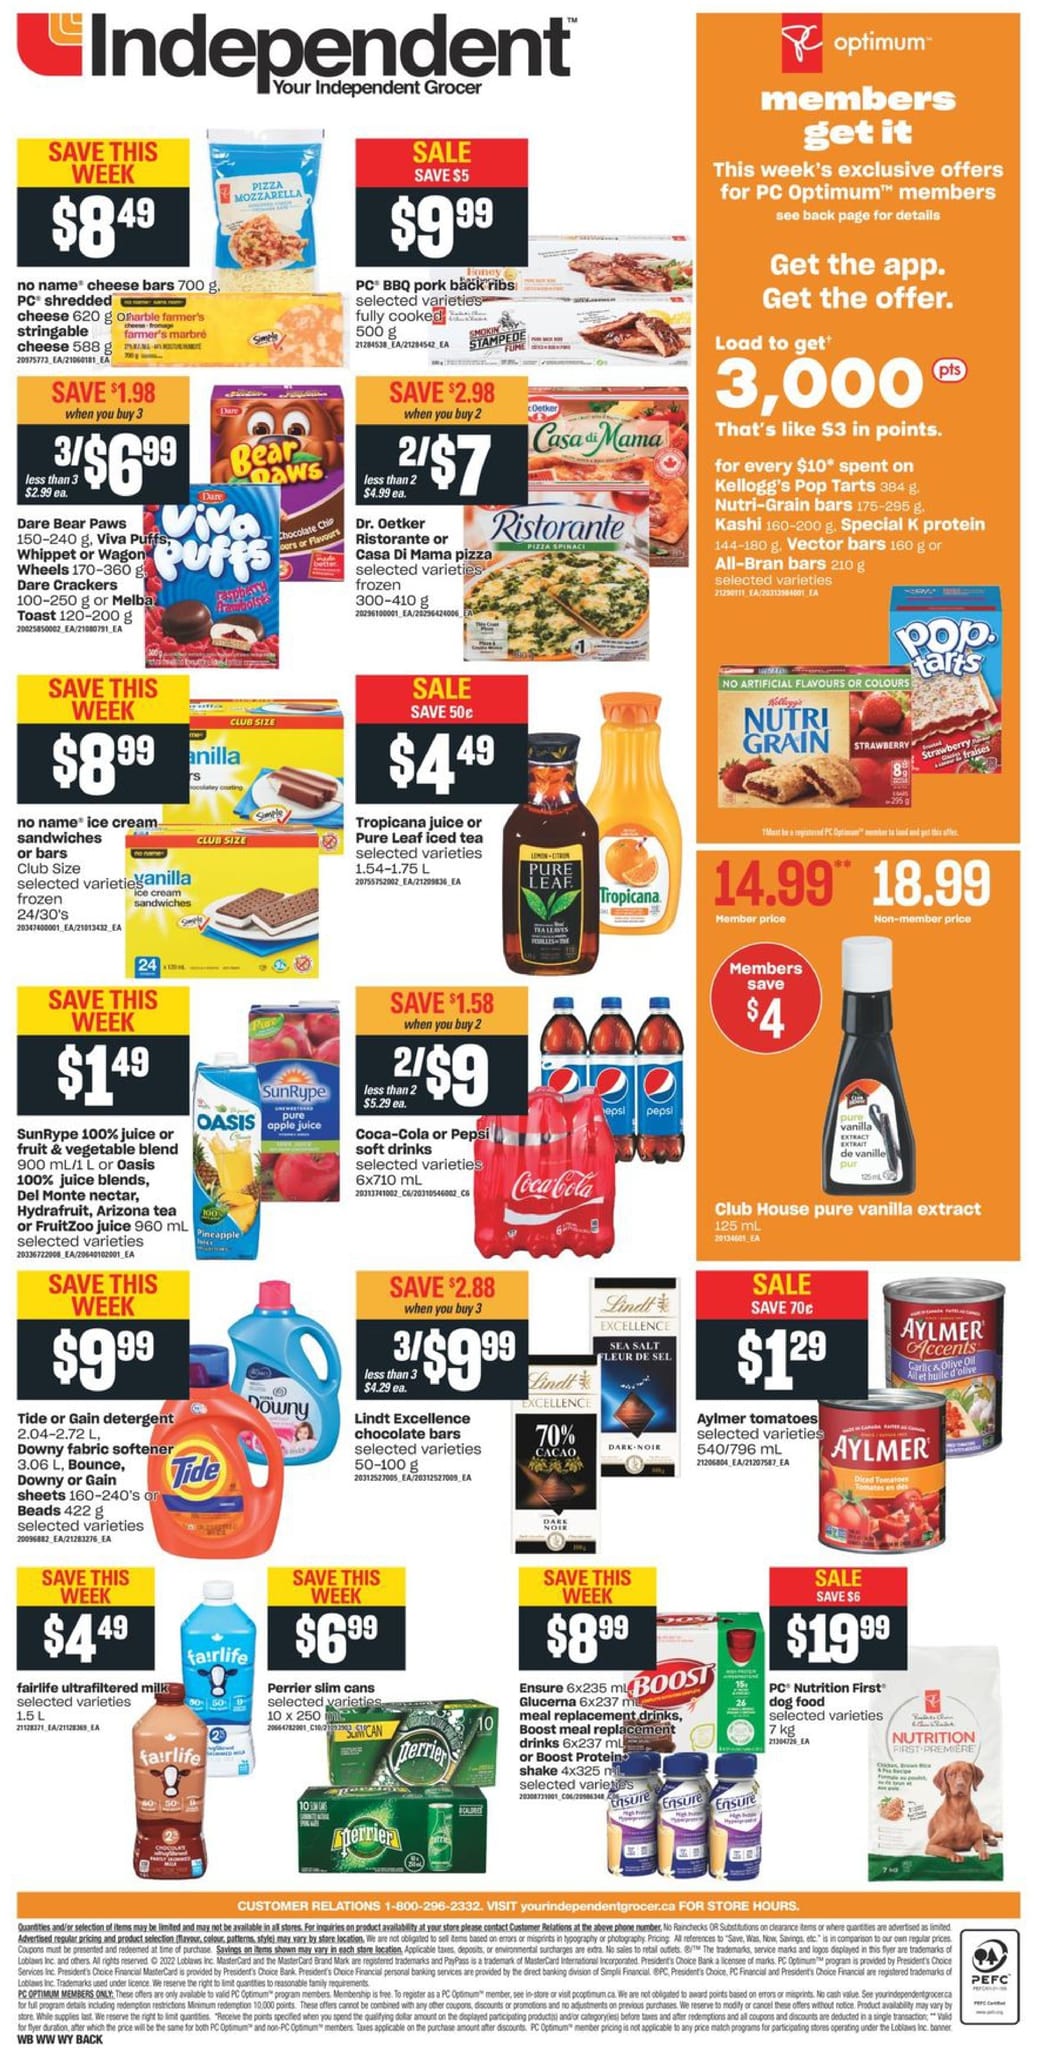 Independent British Columbia - Weekly Flyer Specials - Page 3